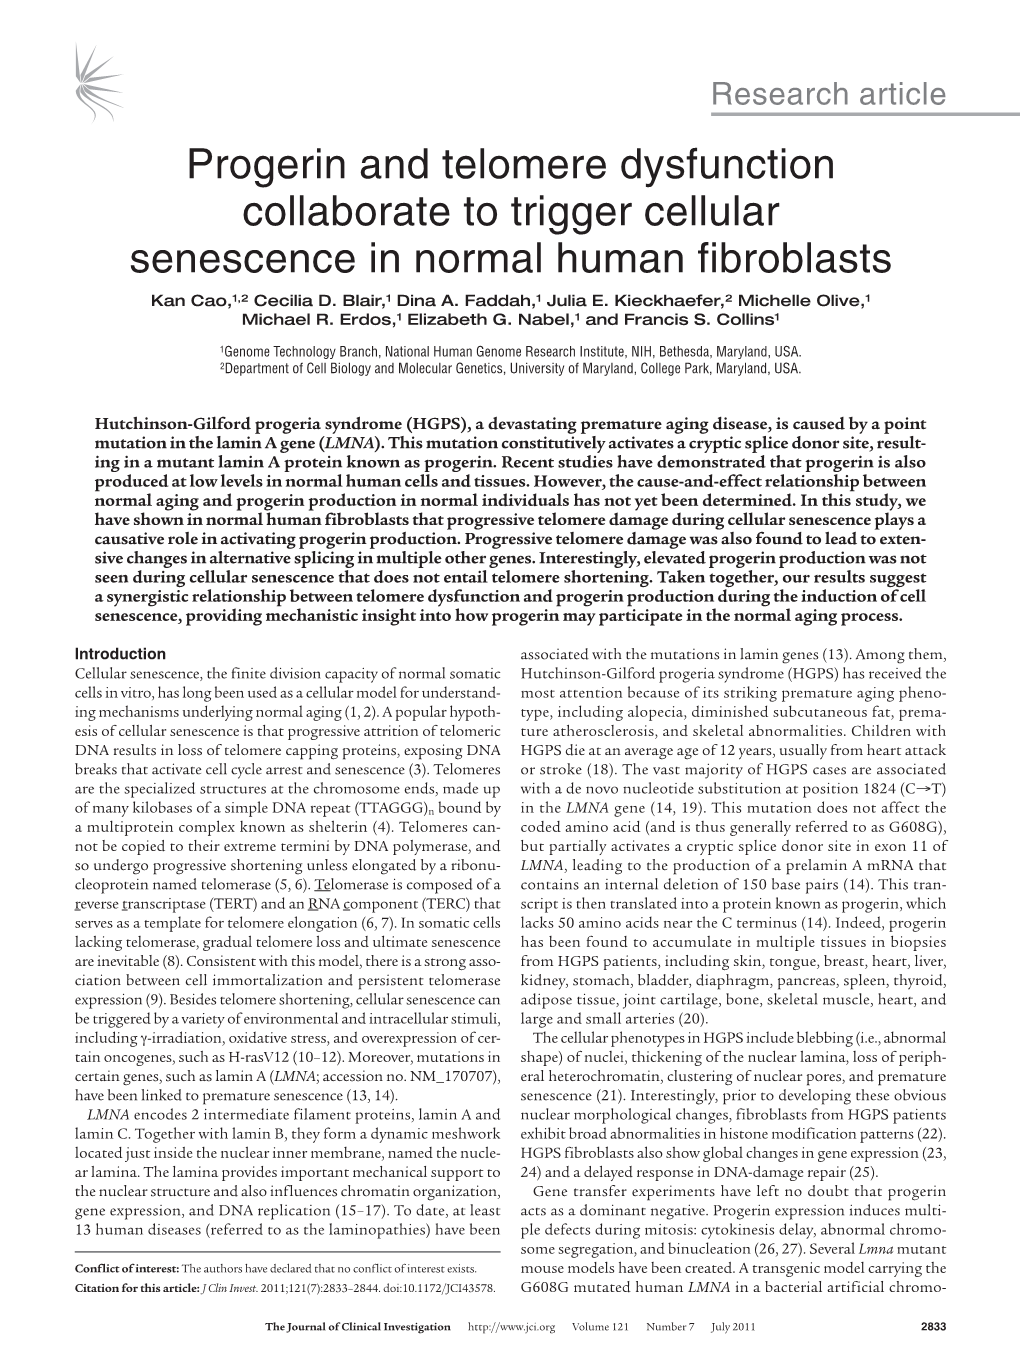 Progerin and Telomere Dysfunction Collaborate to Trigger Cellular Senescence in Normal Human Fibroblasts Kan Cao,1,2 Cecilia D